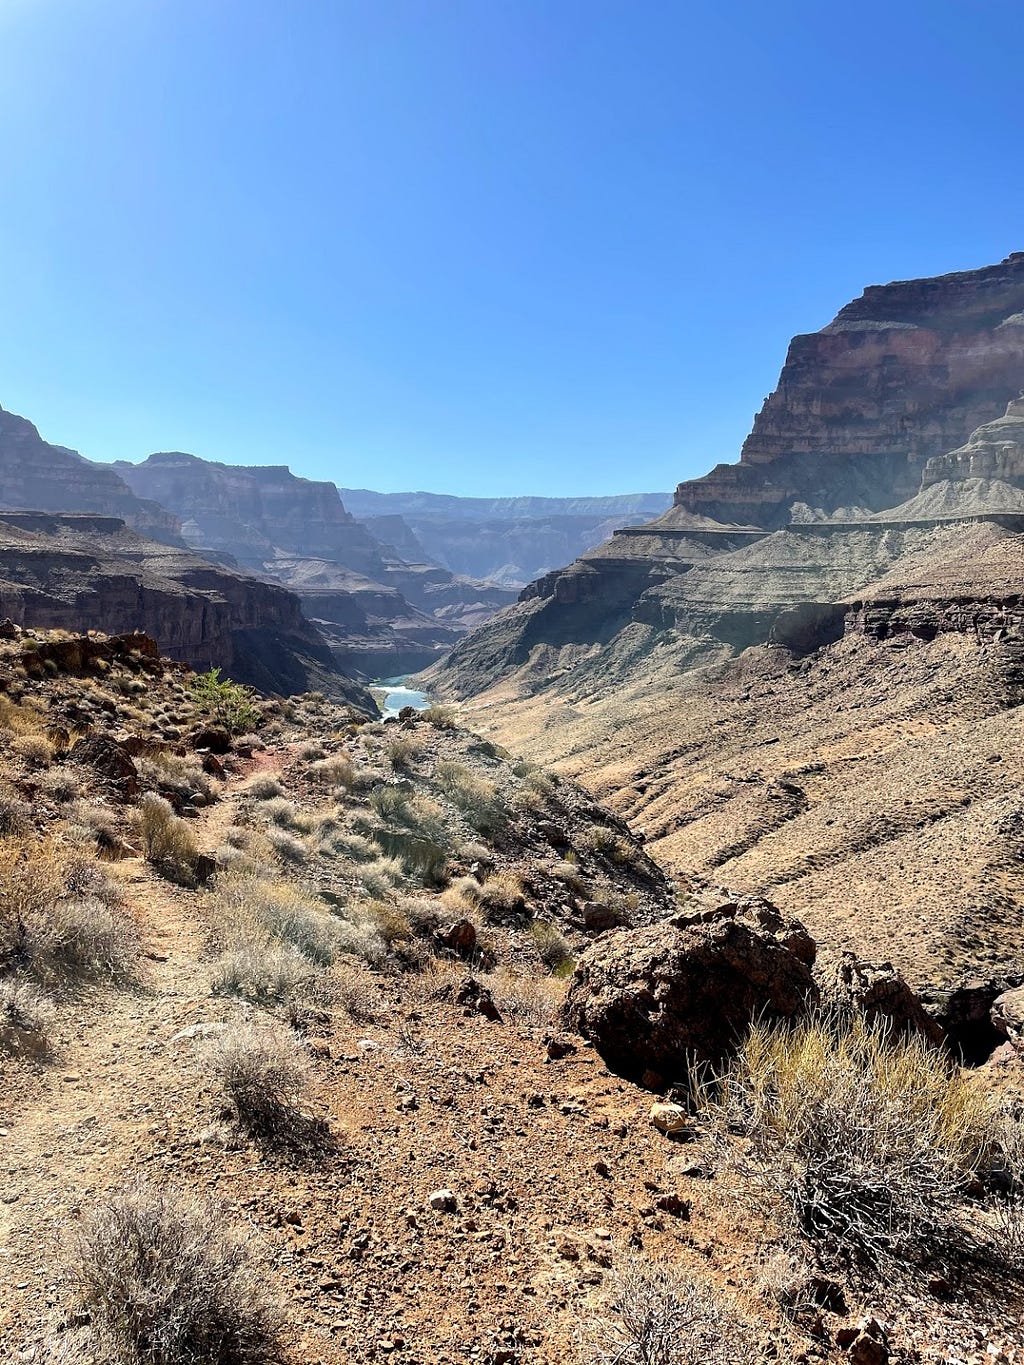 A view of a relatively smooth trail in the grand canyon with a speck of the Colorado River in the distance